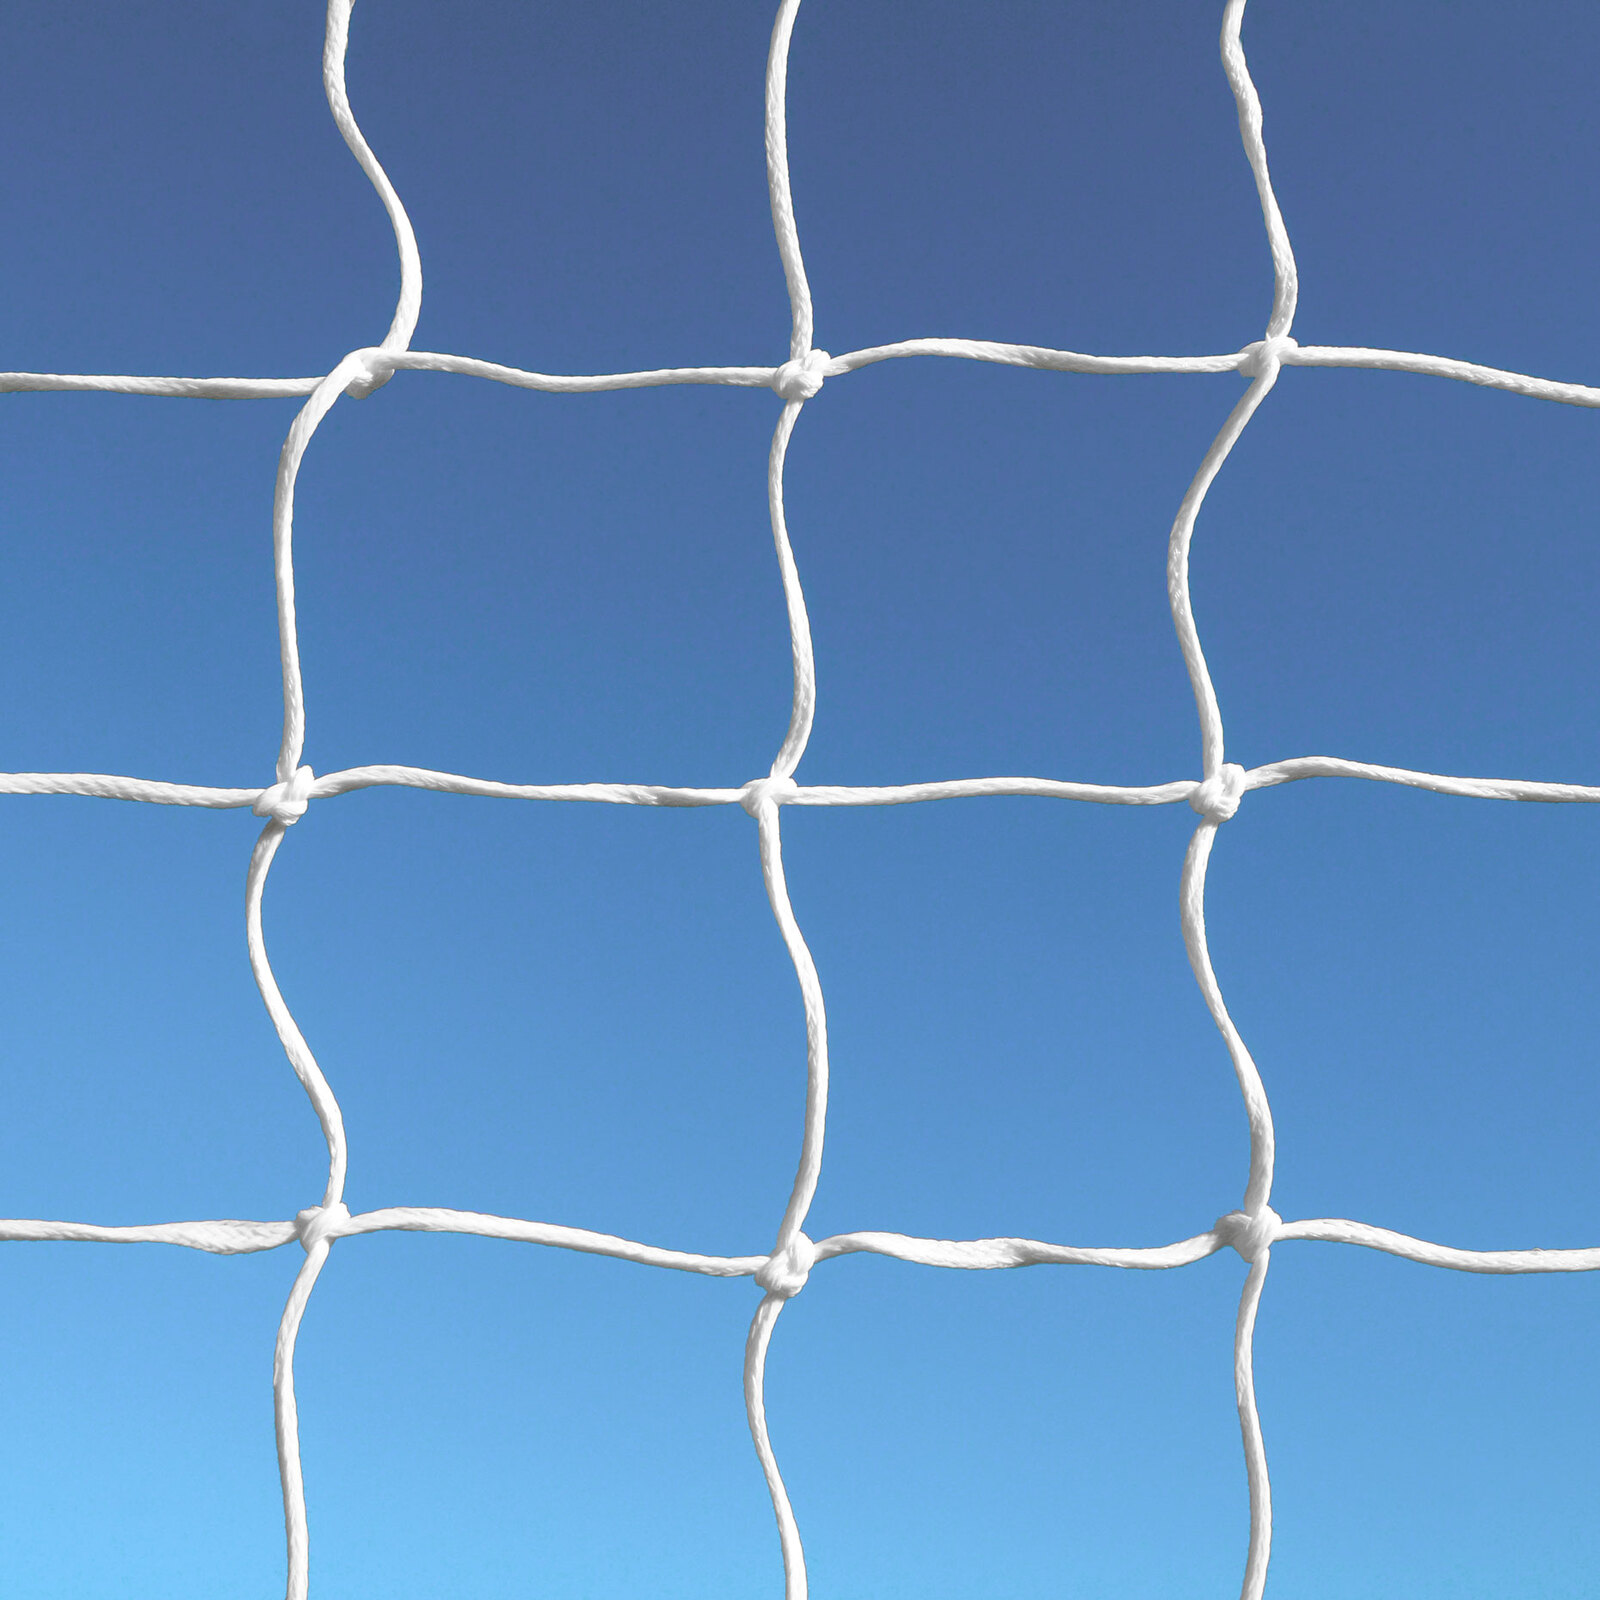 6.4M X 2.1M FORZA ALU110 SOCKETED SOCCER GOAL [Single or Pair:: Single]